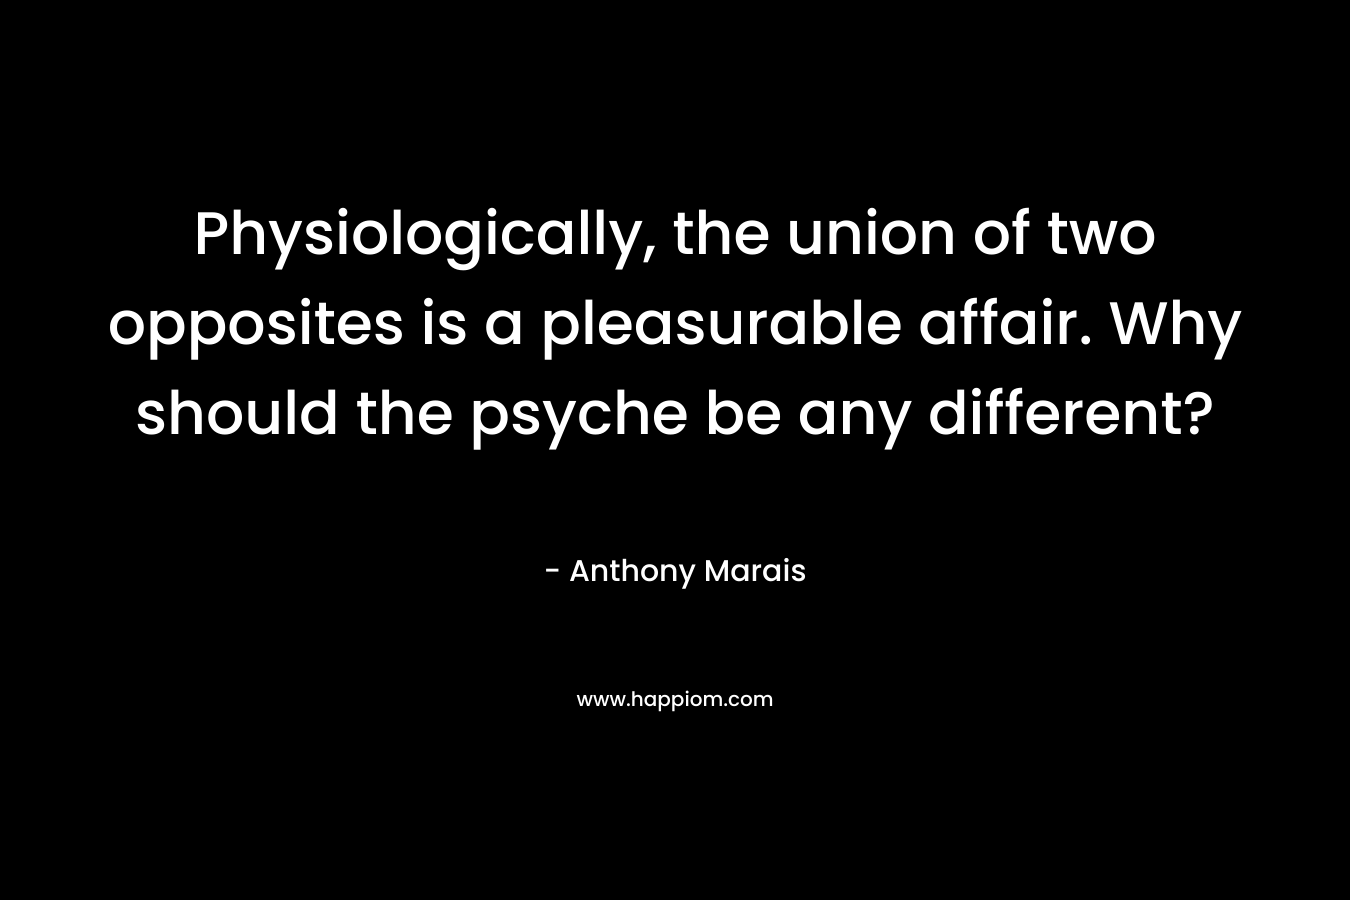 Physiologically, the union of two opposites is a pleasurable affair. Why should the psyche be any different? – Anthony Marais